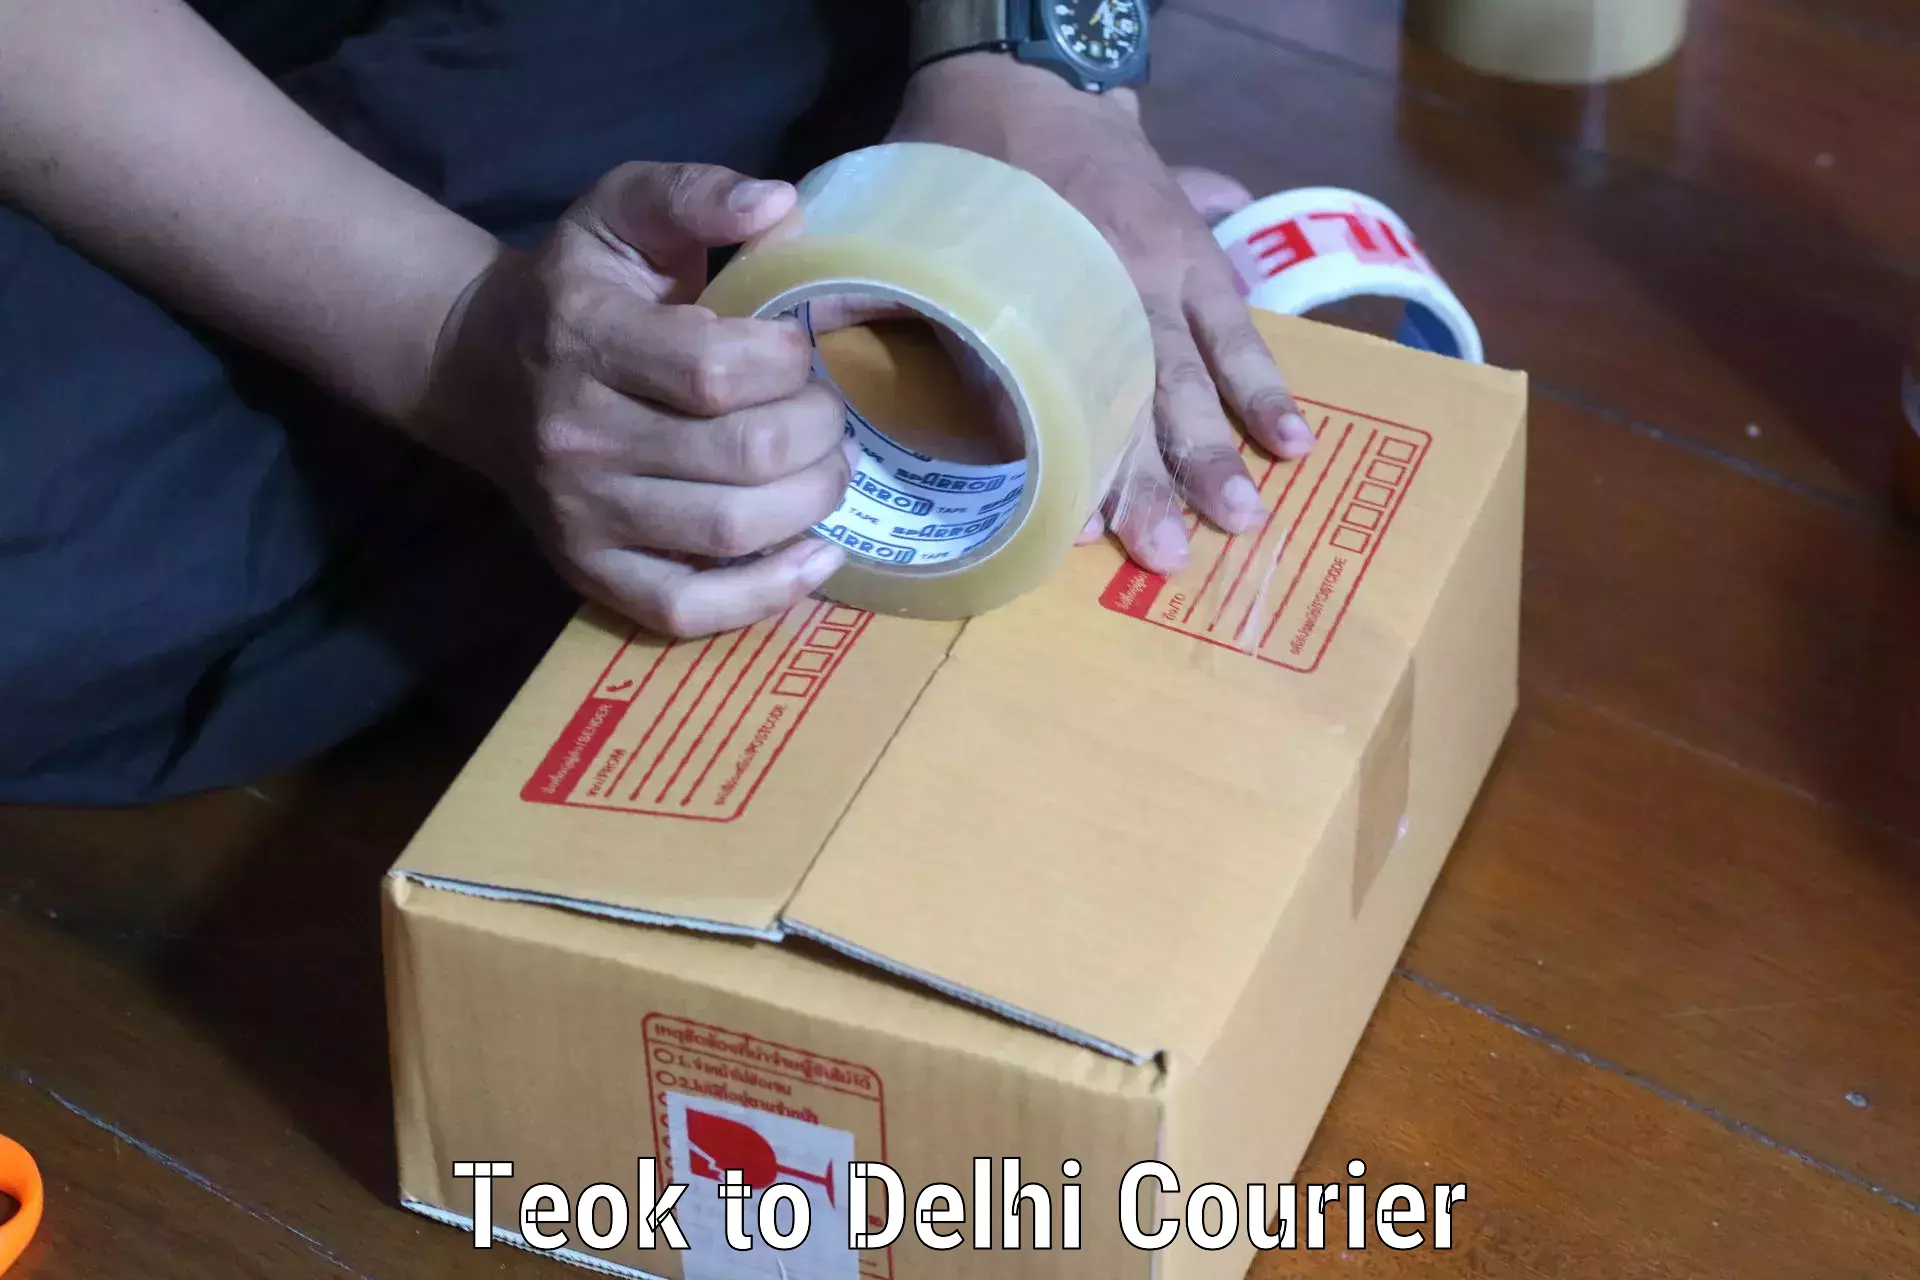 State-of-the-art courier technology Teok to NCR